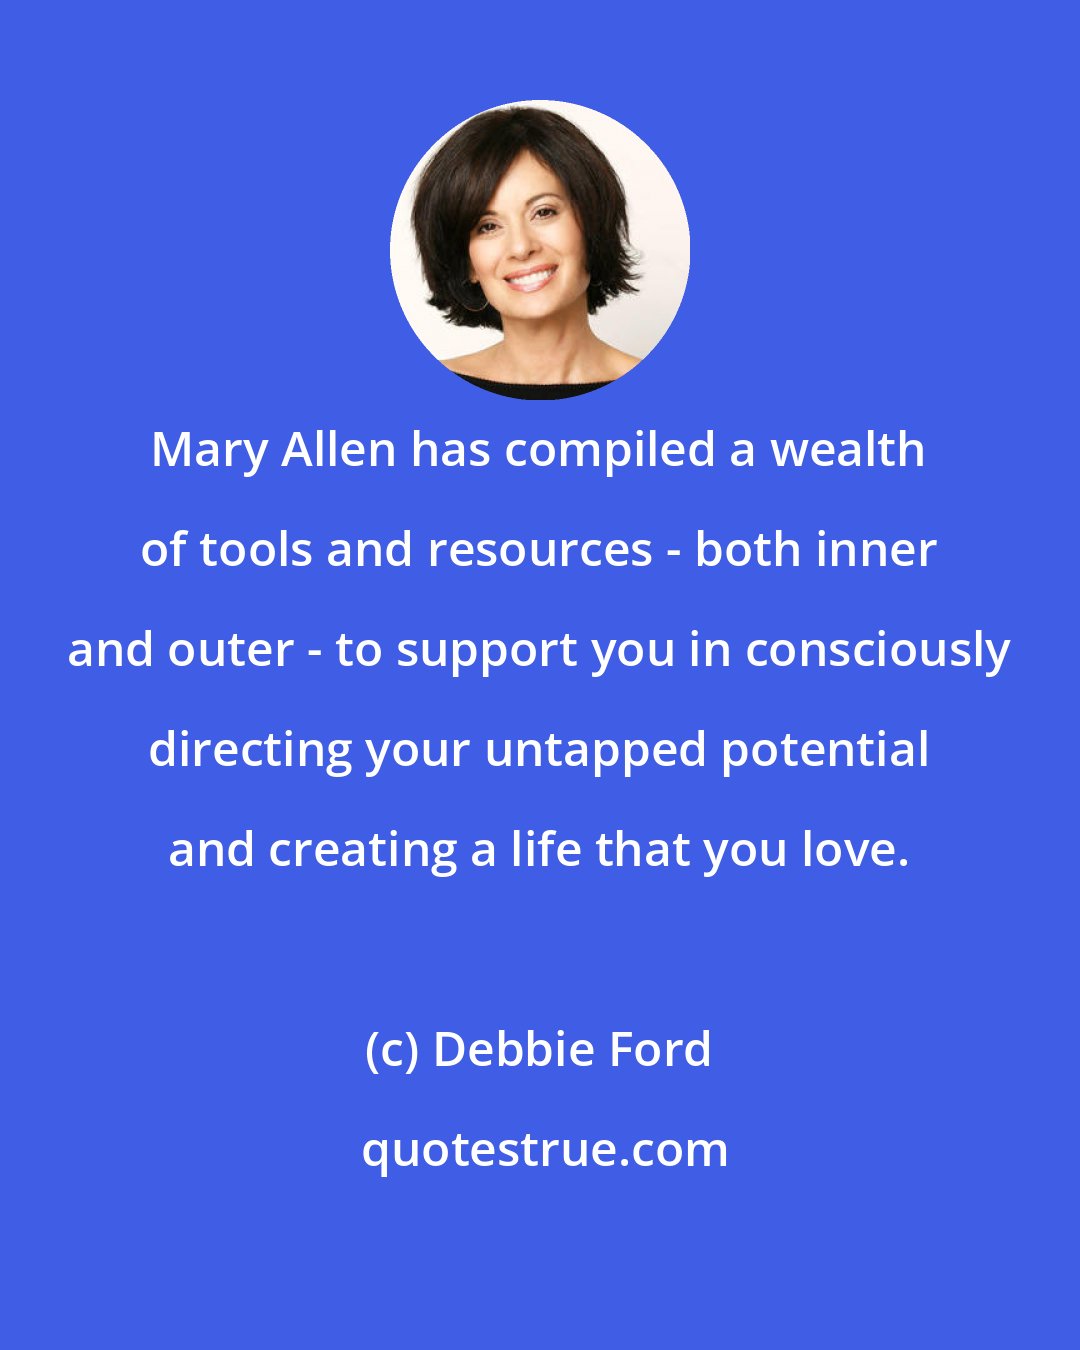 Debbie Ford: Mary Allen has compiled a wealth of tools and resources - both inner and outer - to support you in consciously directing your untapped potential and creating a life that you love.